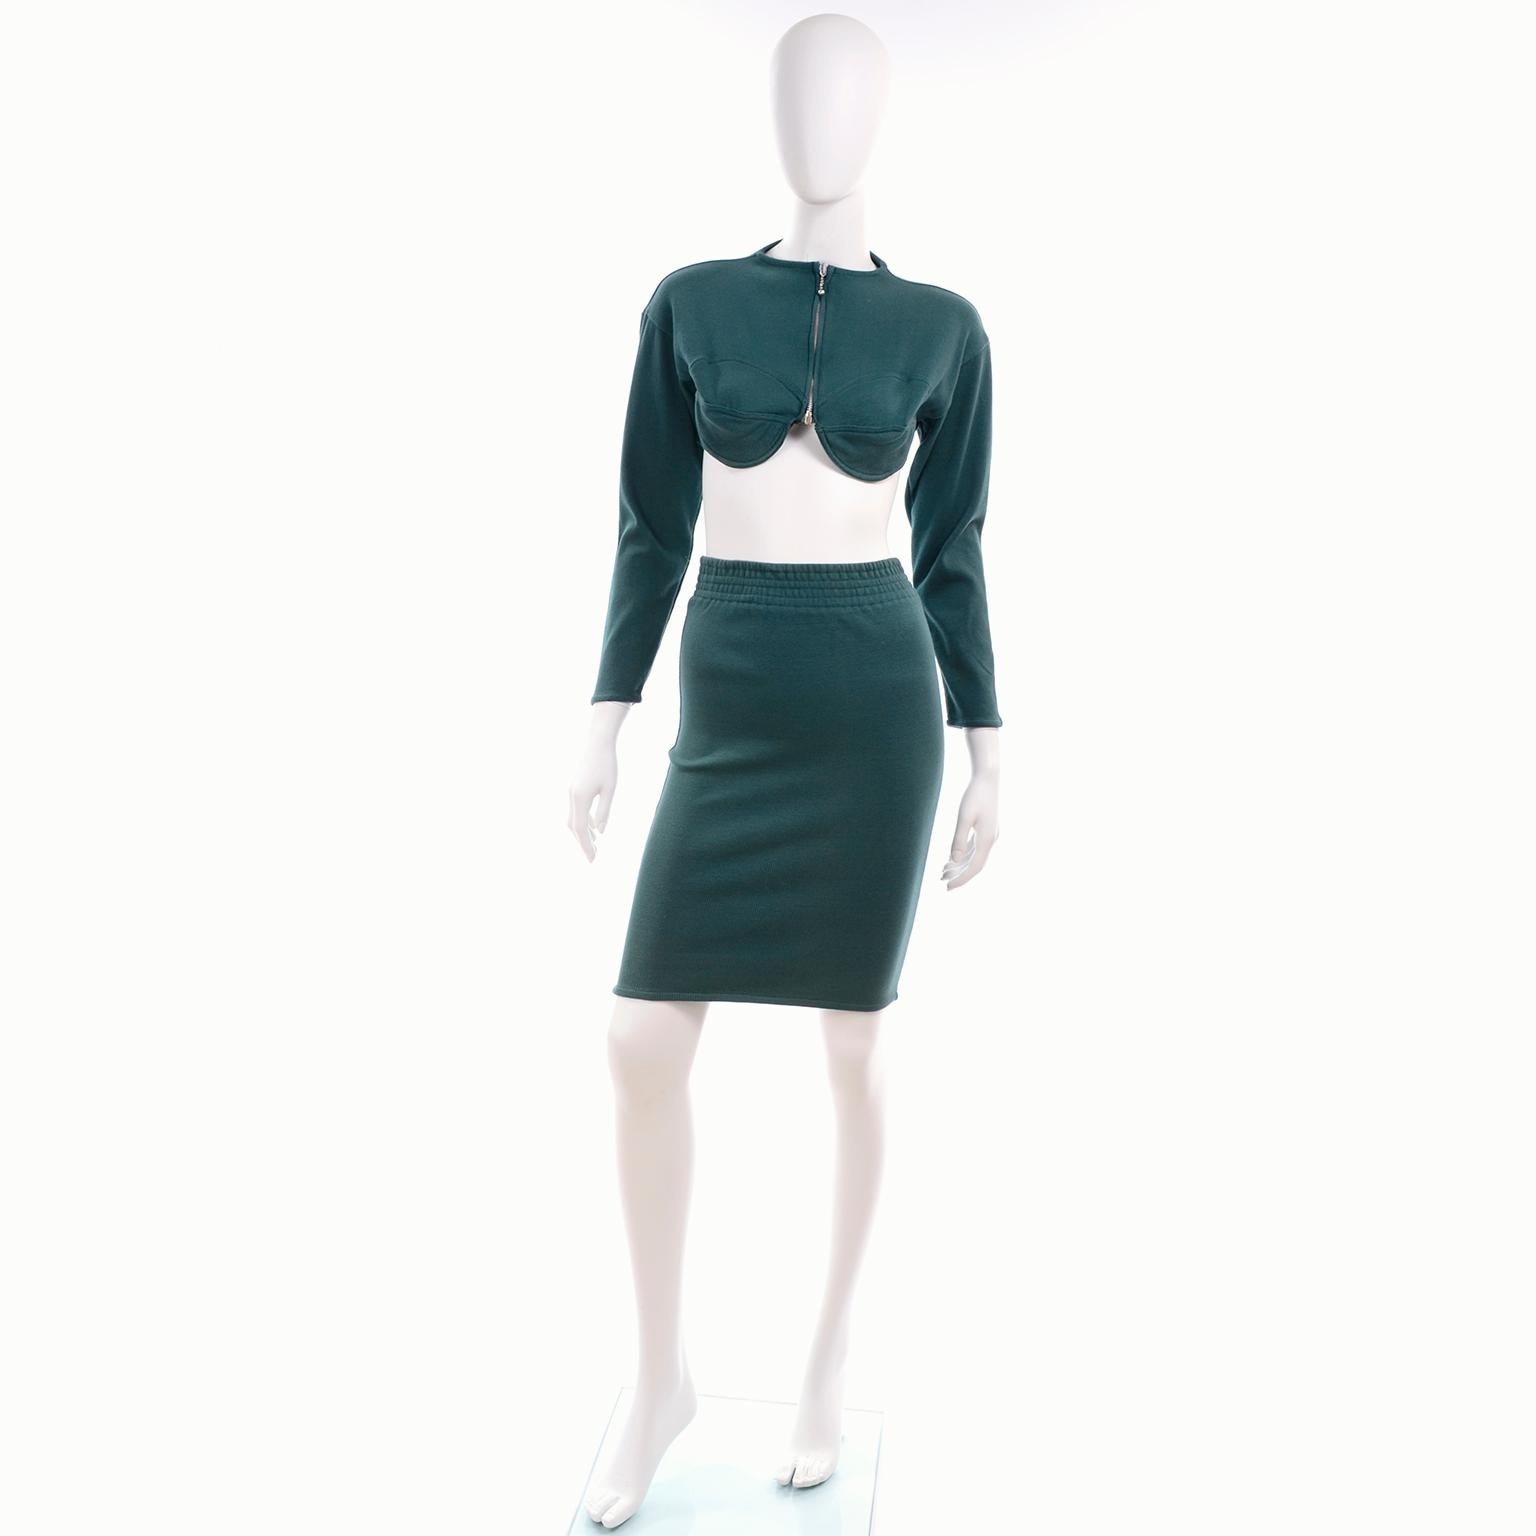 We absolutely adore this vintage late 1980's Jean Paul Gaultier Public outfit!  This two piece bare midriff ensemble is in a rich deep shade of green and is in an iconic Jean Paul Gaultier style.  This knit 2 pc dress includes a cropped bustier